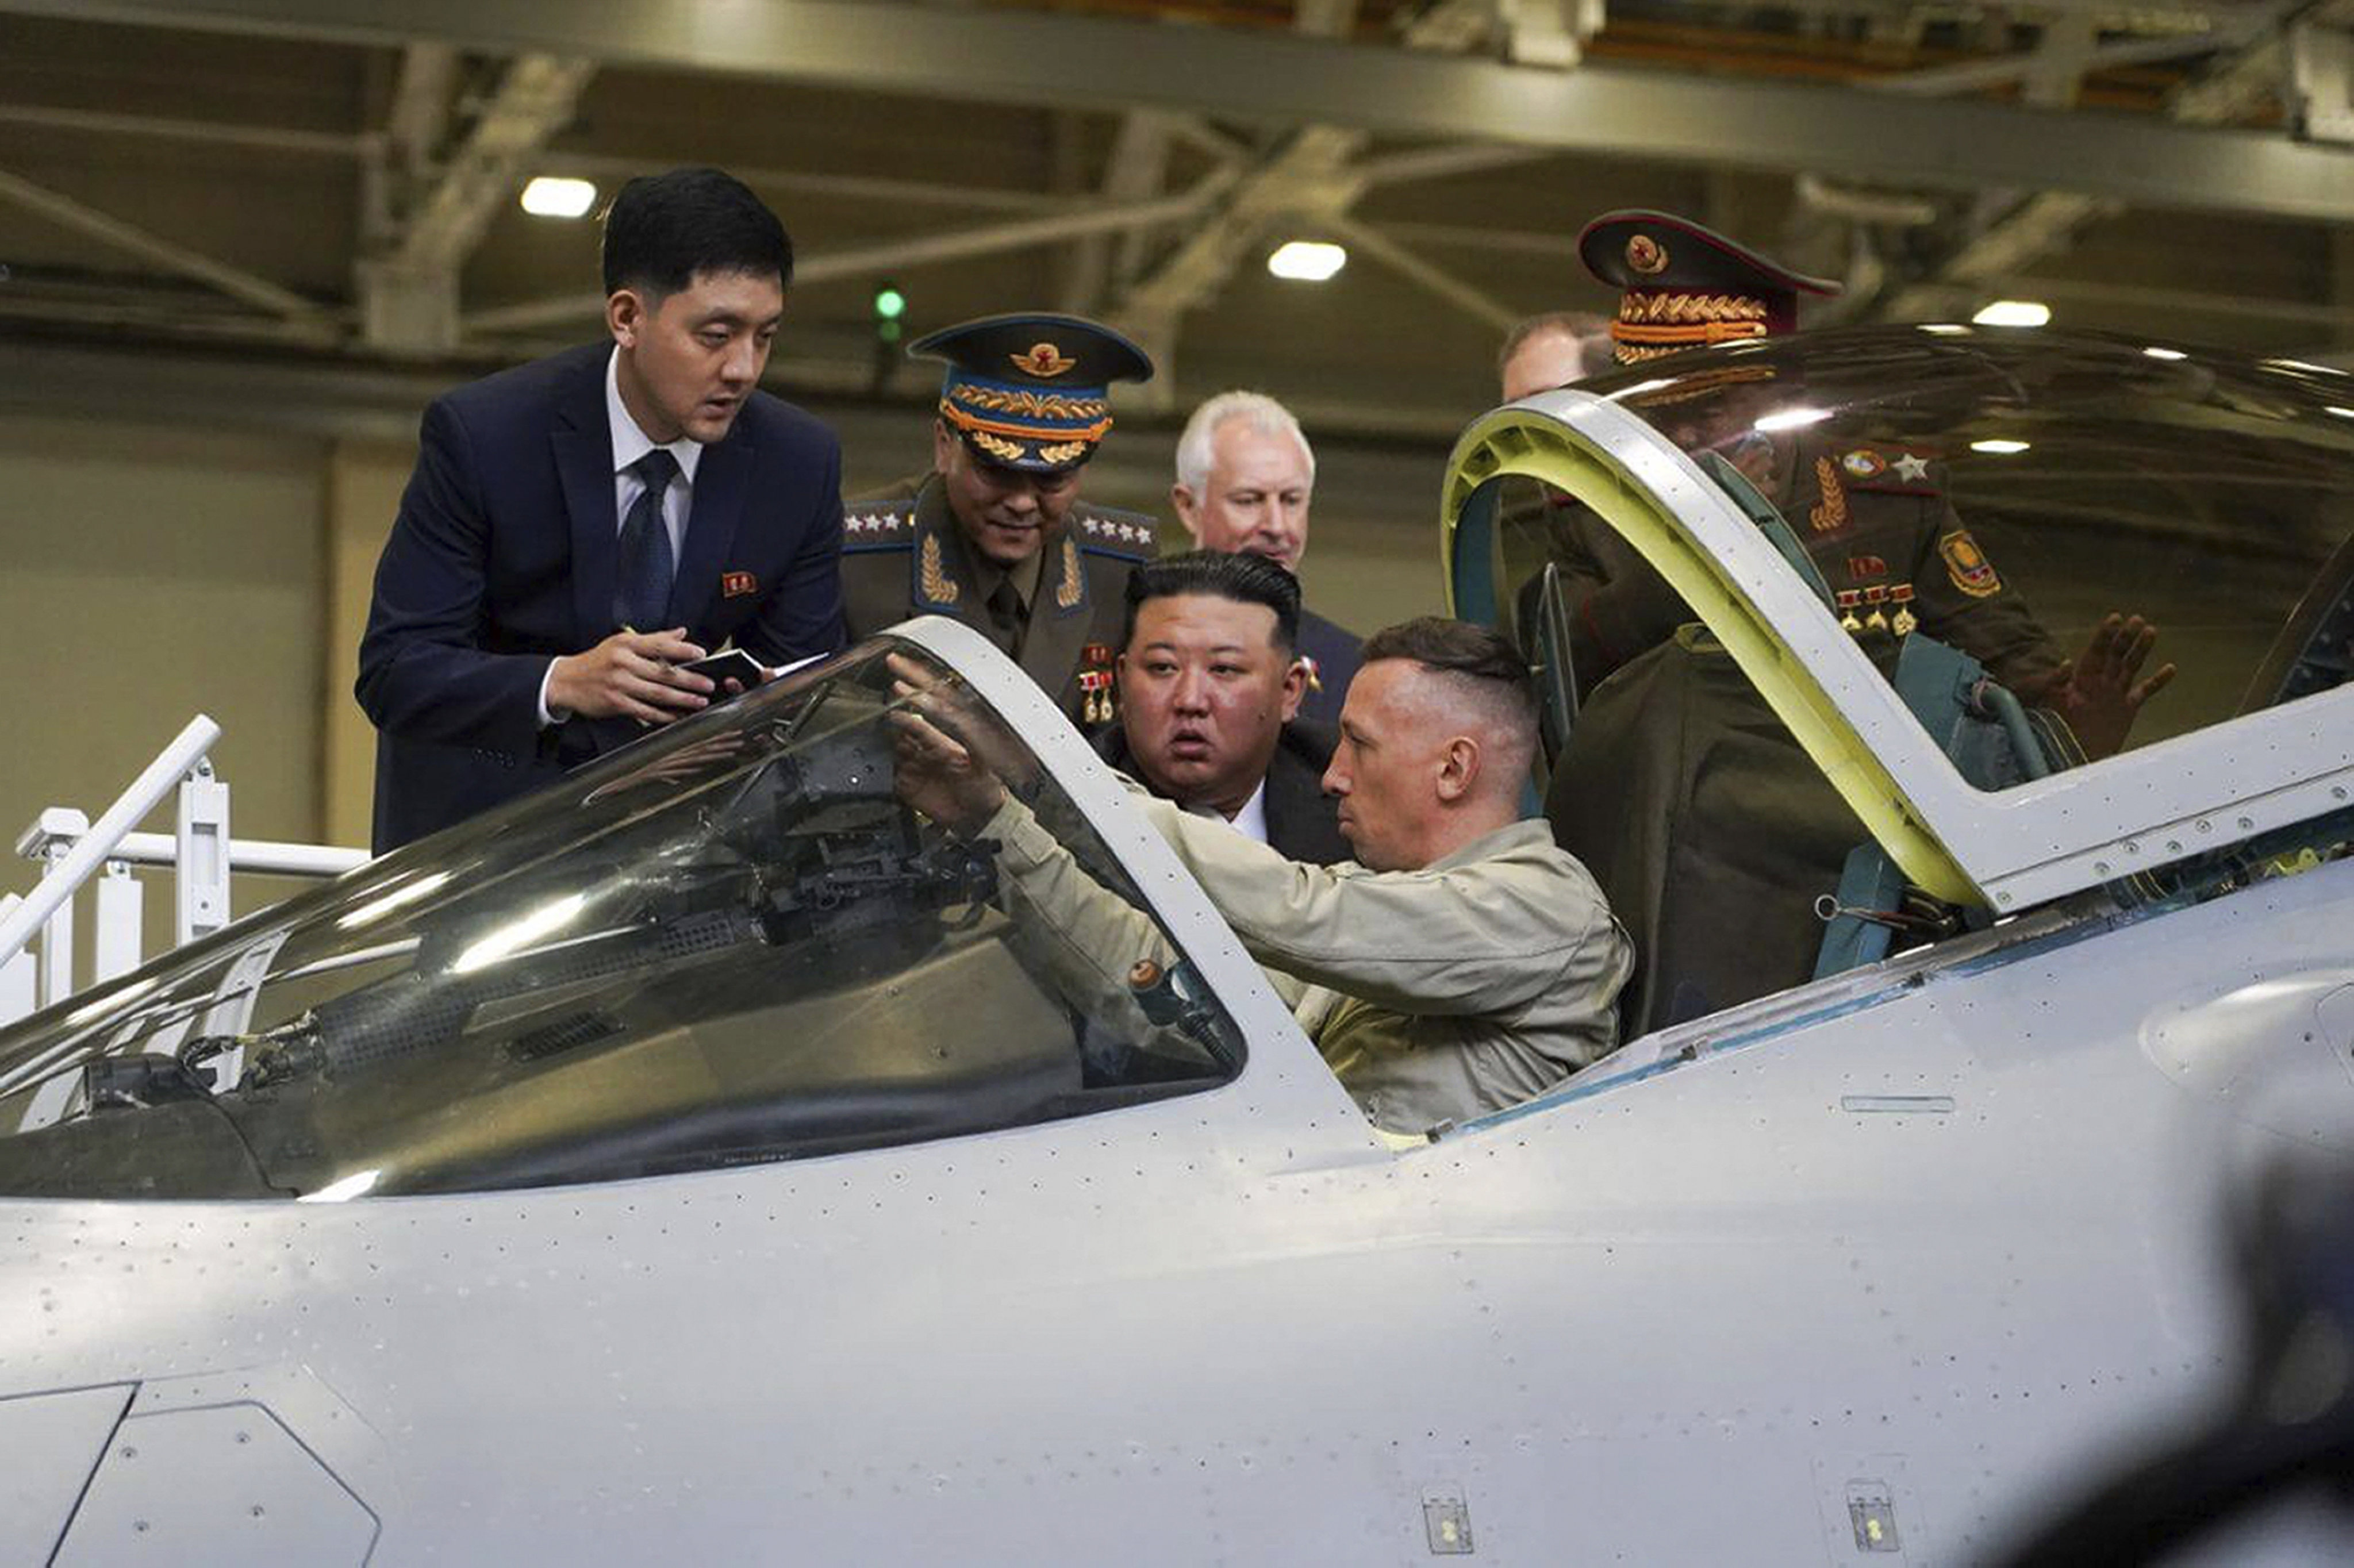 North Korean leader Kim Jong Un looks at a military jet cockpit while visiting a Russian aircraft plant that builds fighter jets in Komsomolsk-on-Amur. Photo: AP